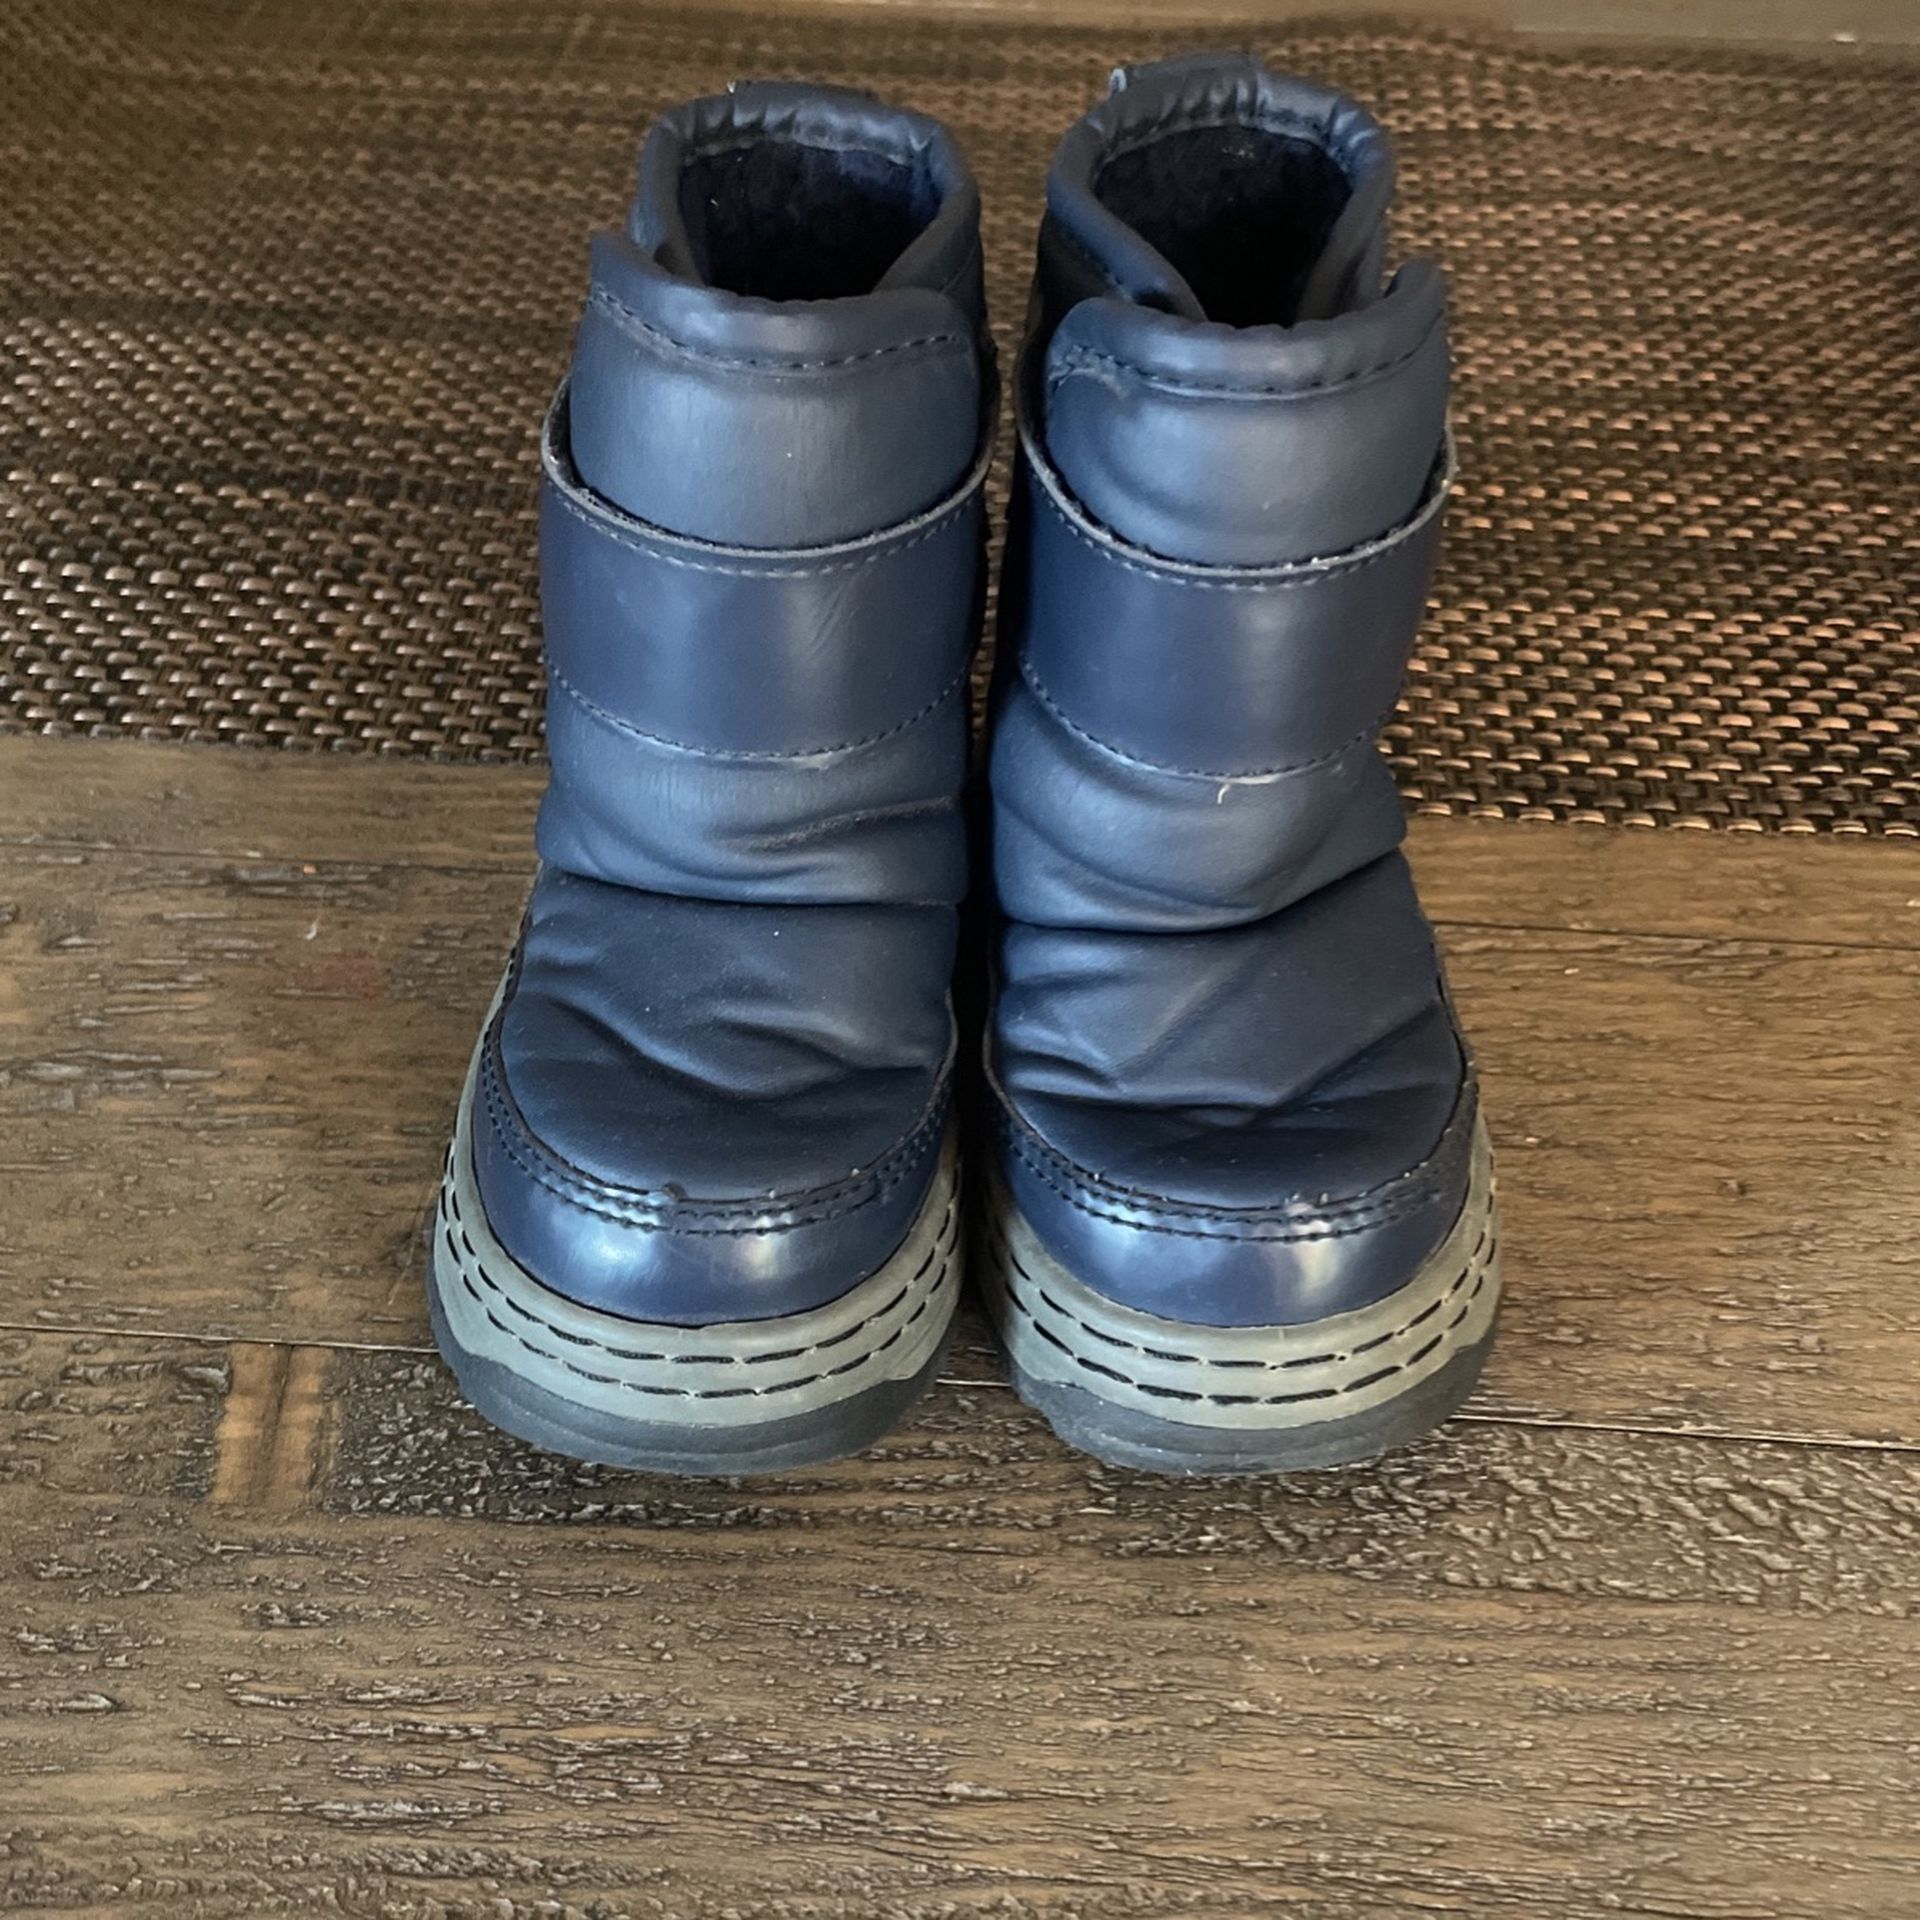 Toddler Snow Boots Size 6